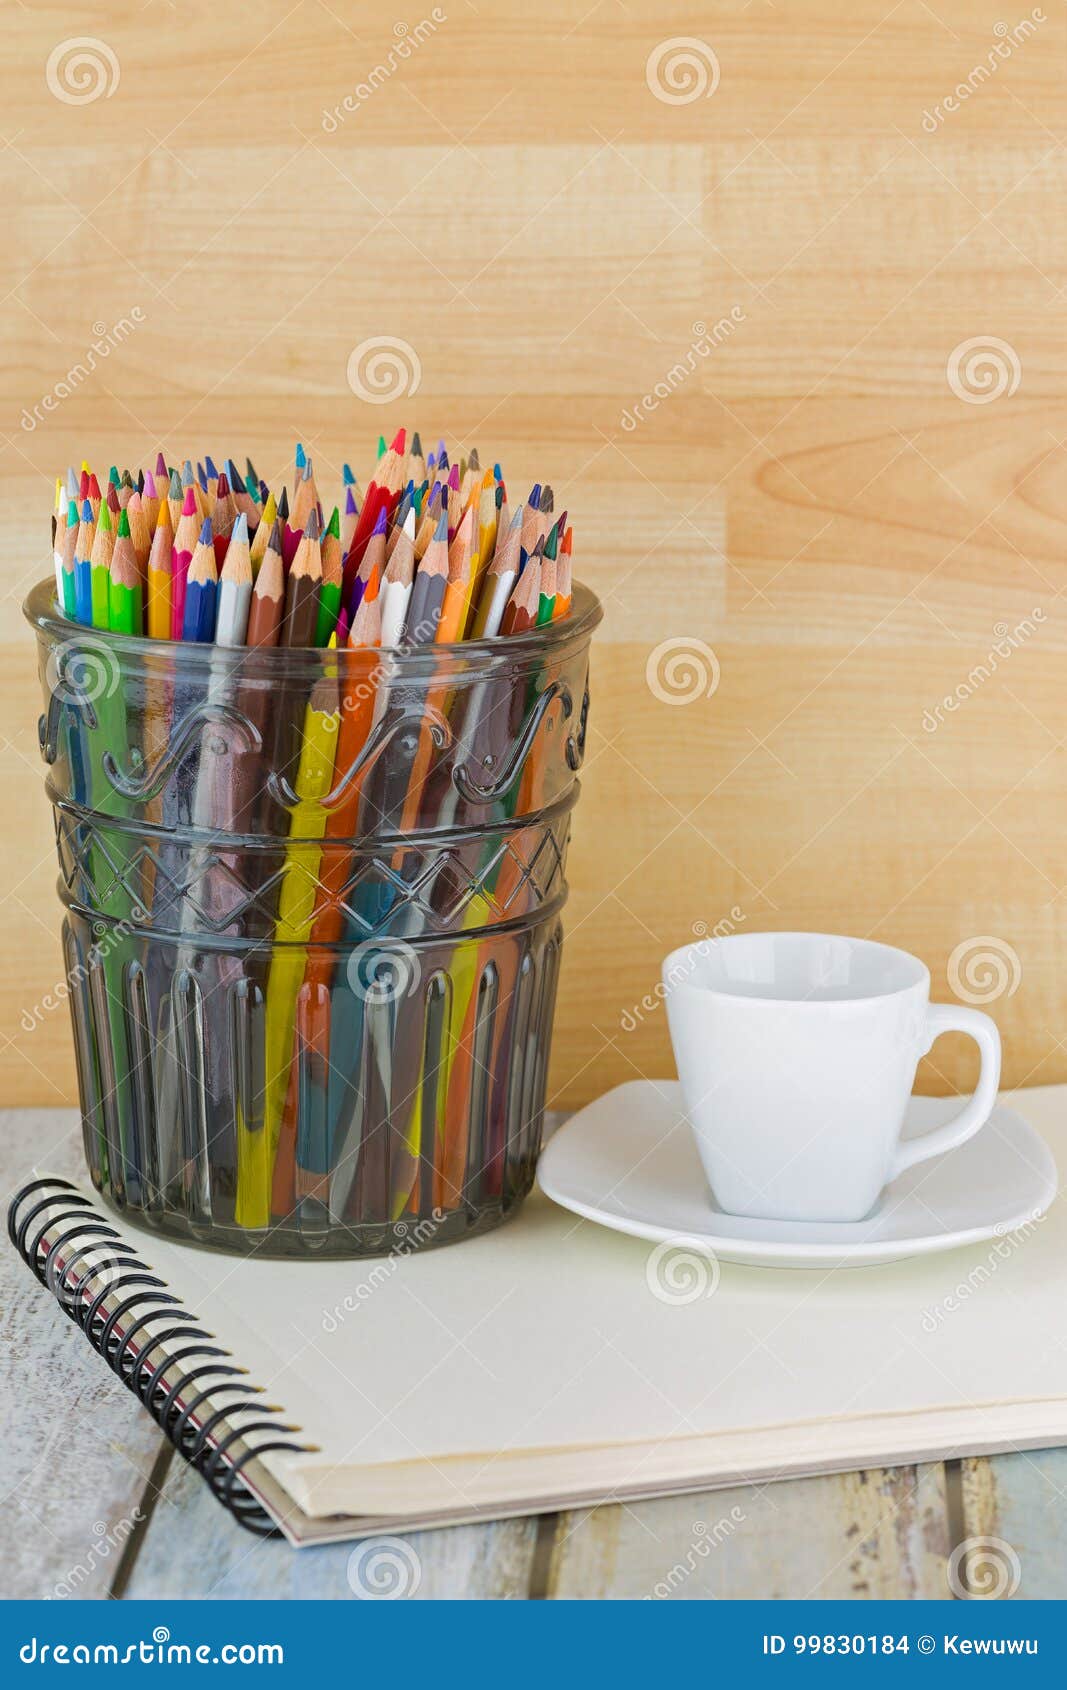 Hot Espresso Coffee Cup Next To Coloring Colored Pencils On Sketch